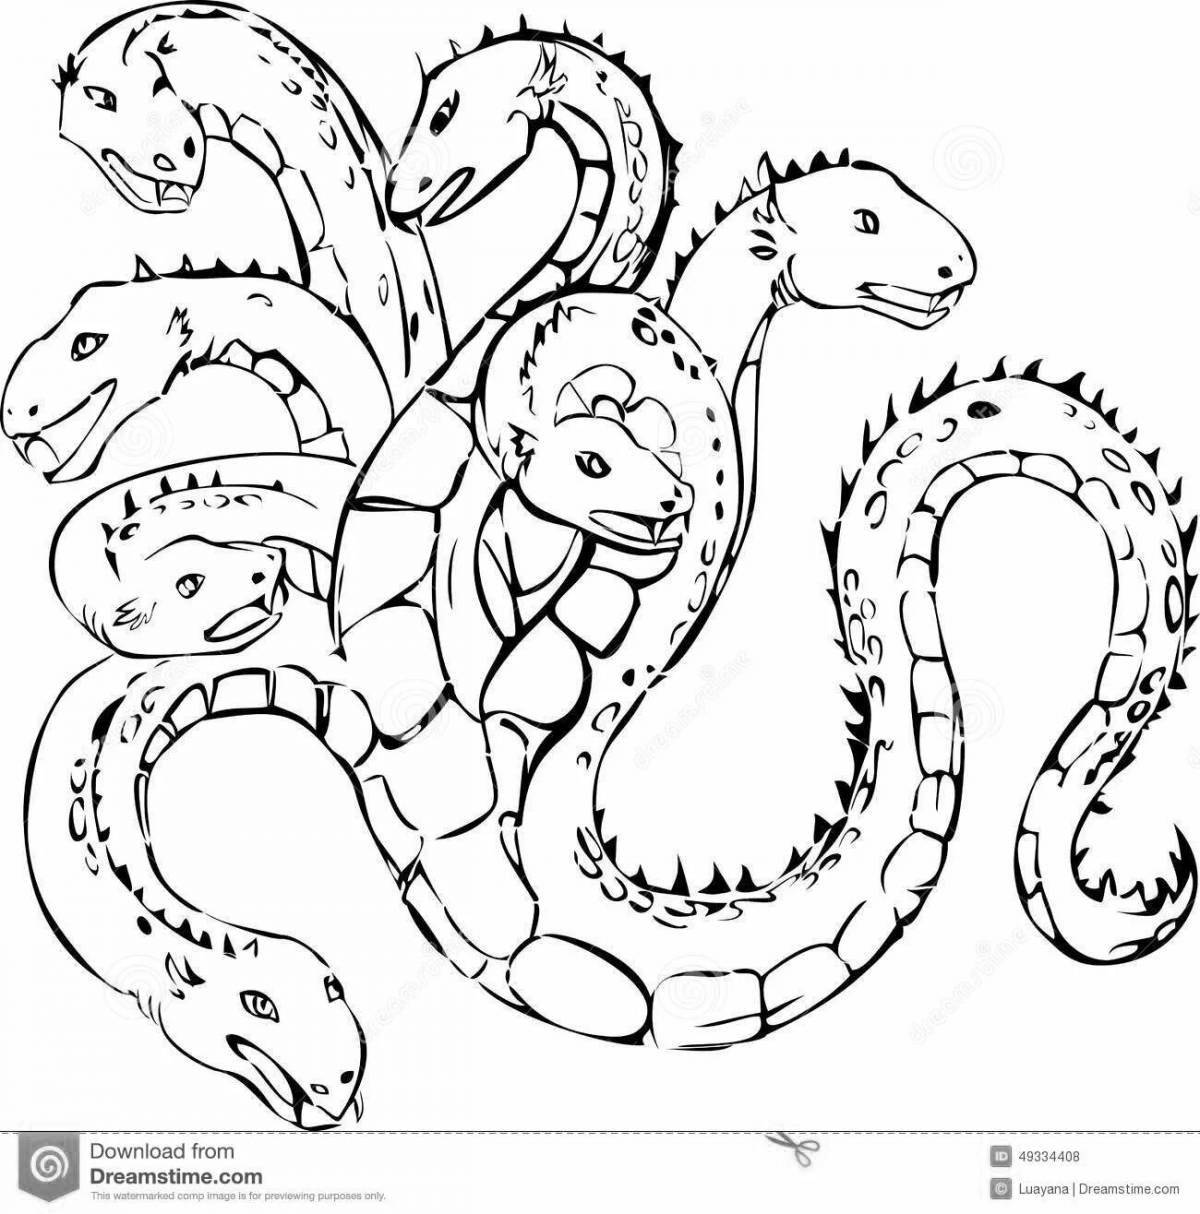 Adorable six-headed snake coloring book